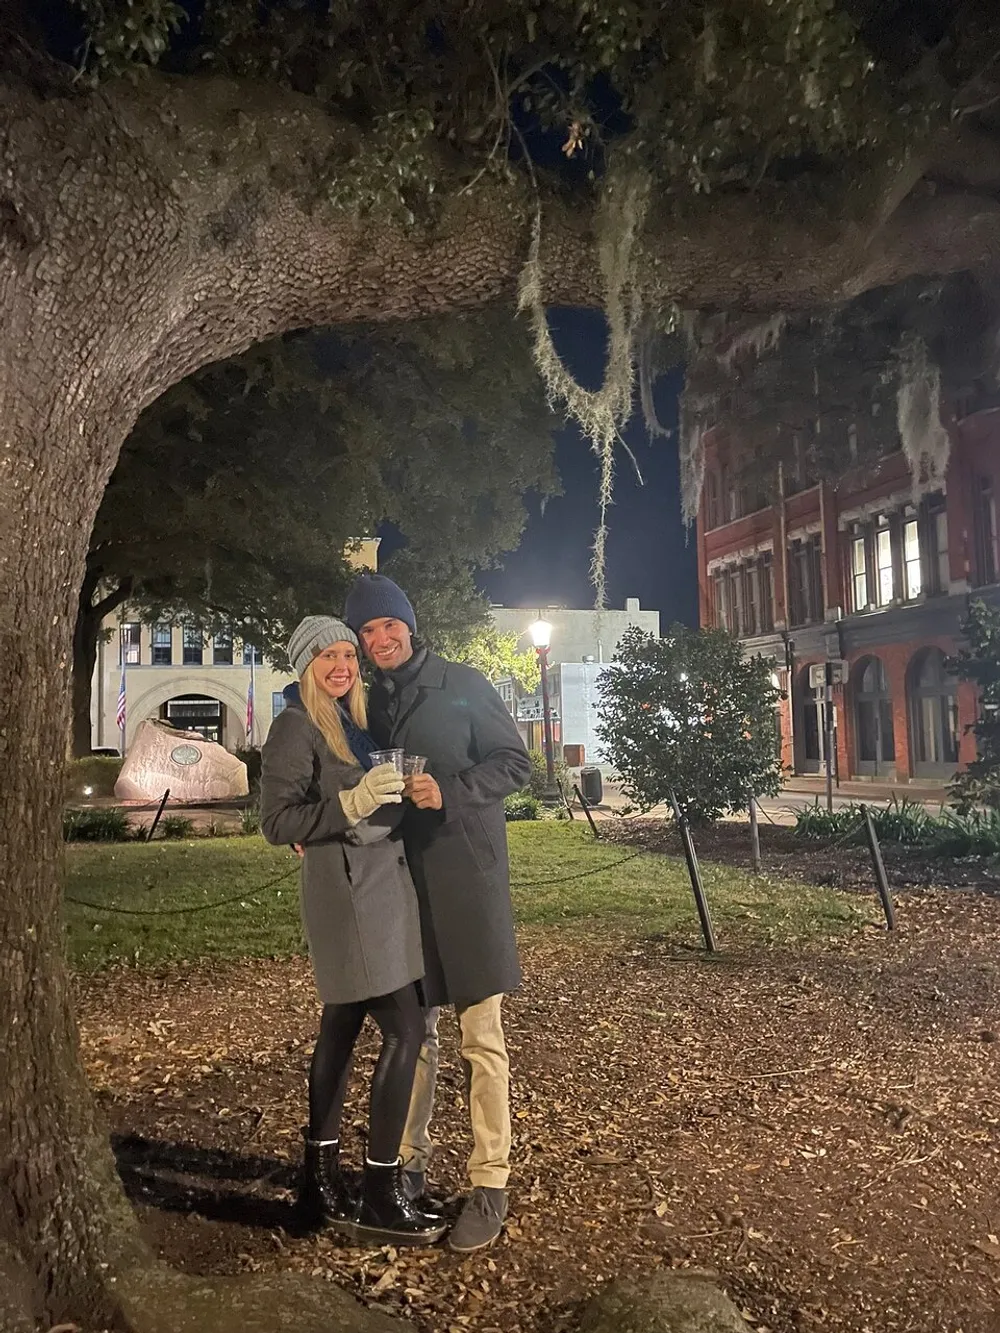 A smiling couple stands closely together under a tree adorned with Spanish moss at night evoking a cozy and romantic atmosphere